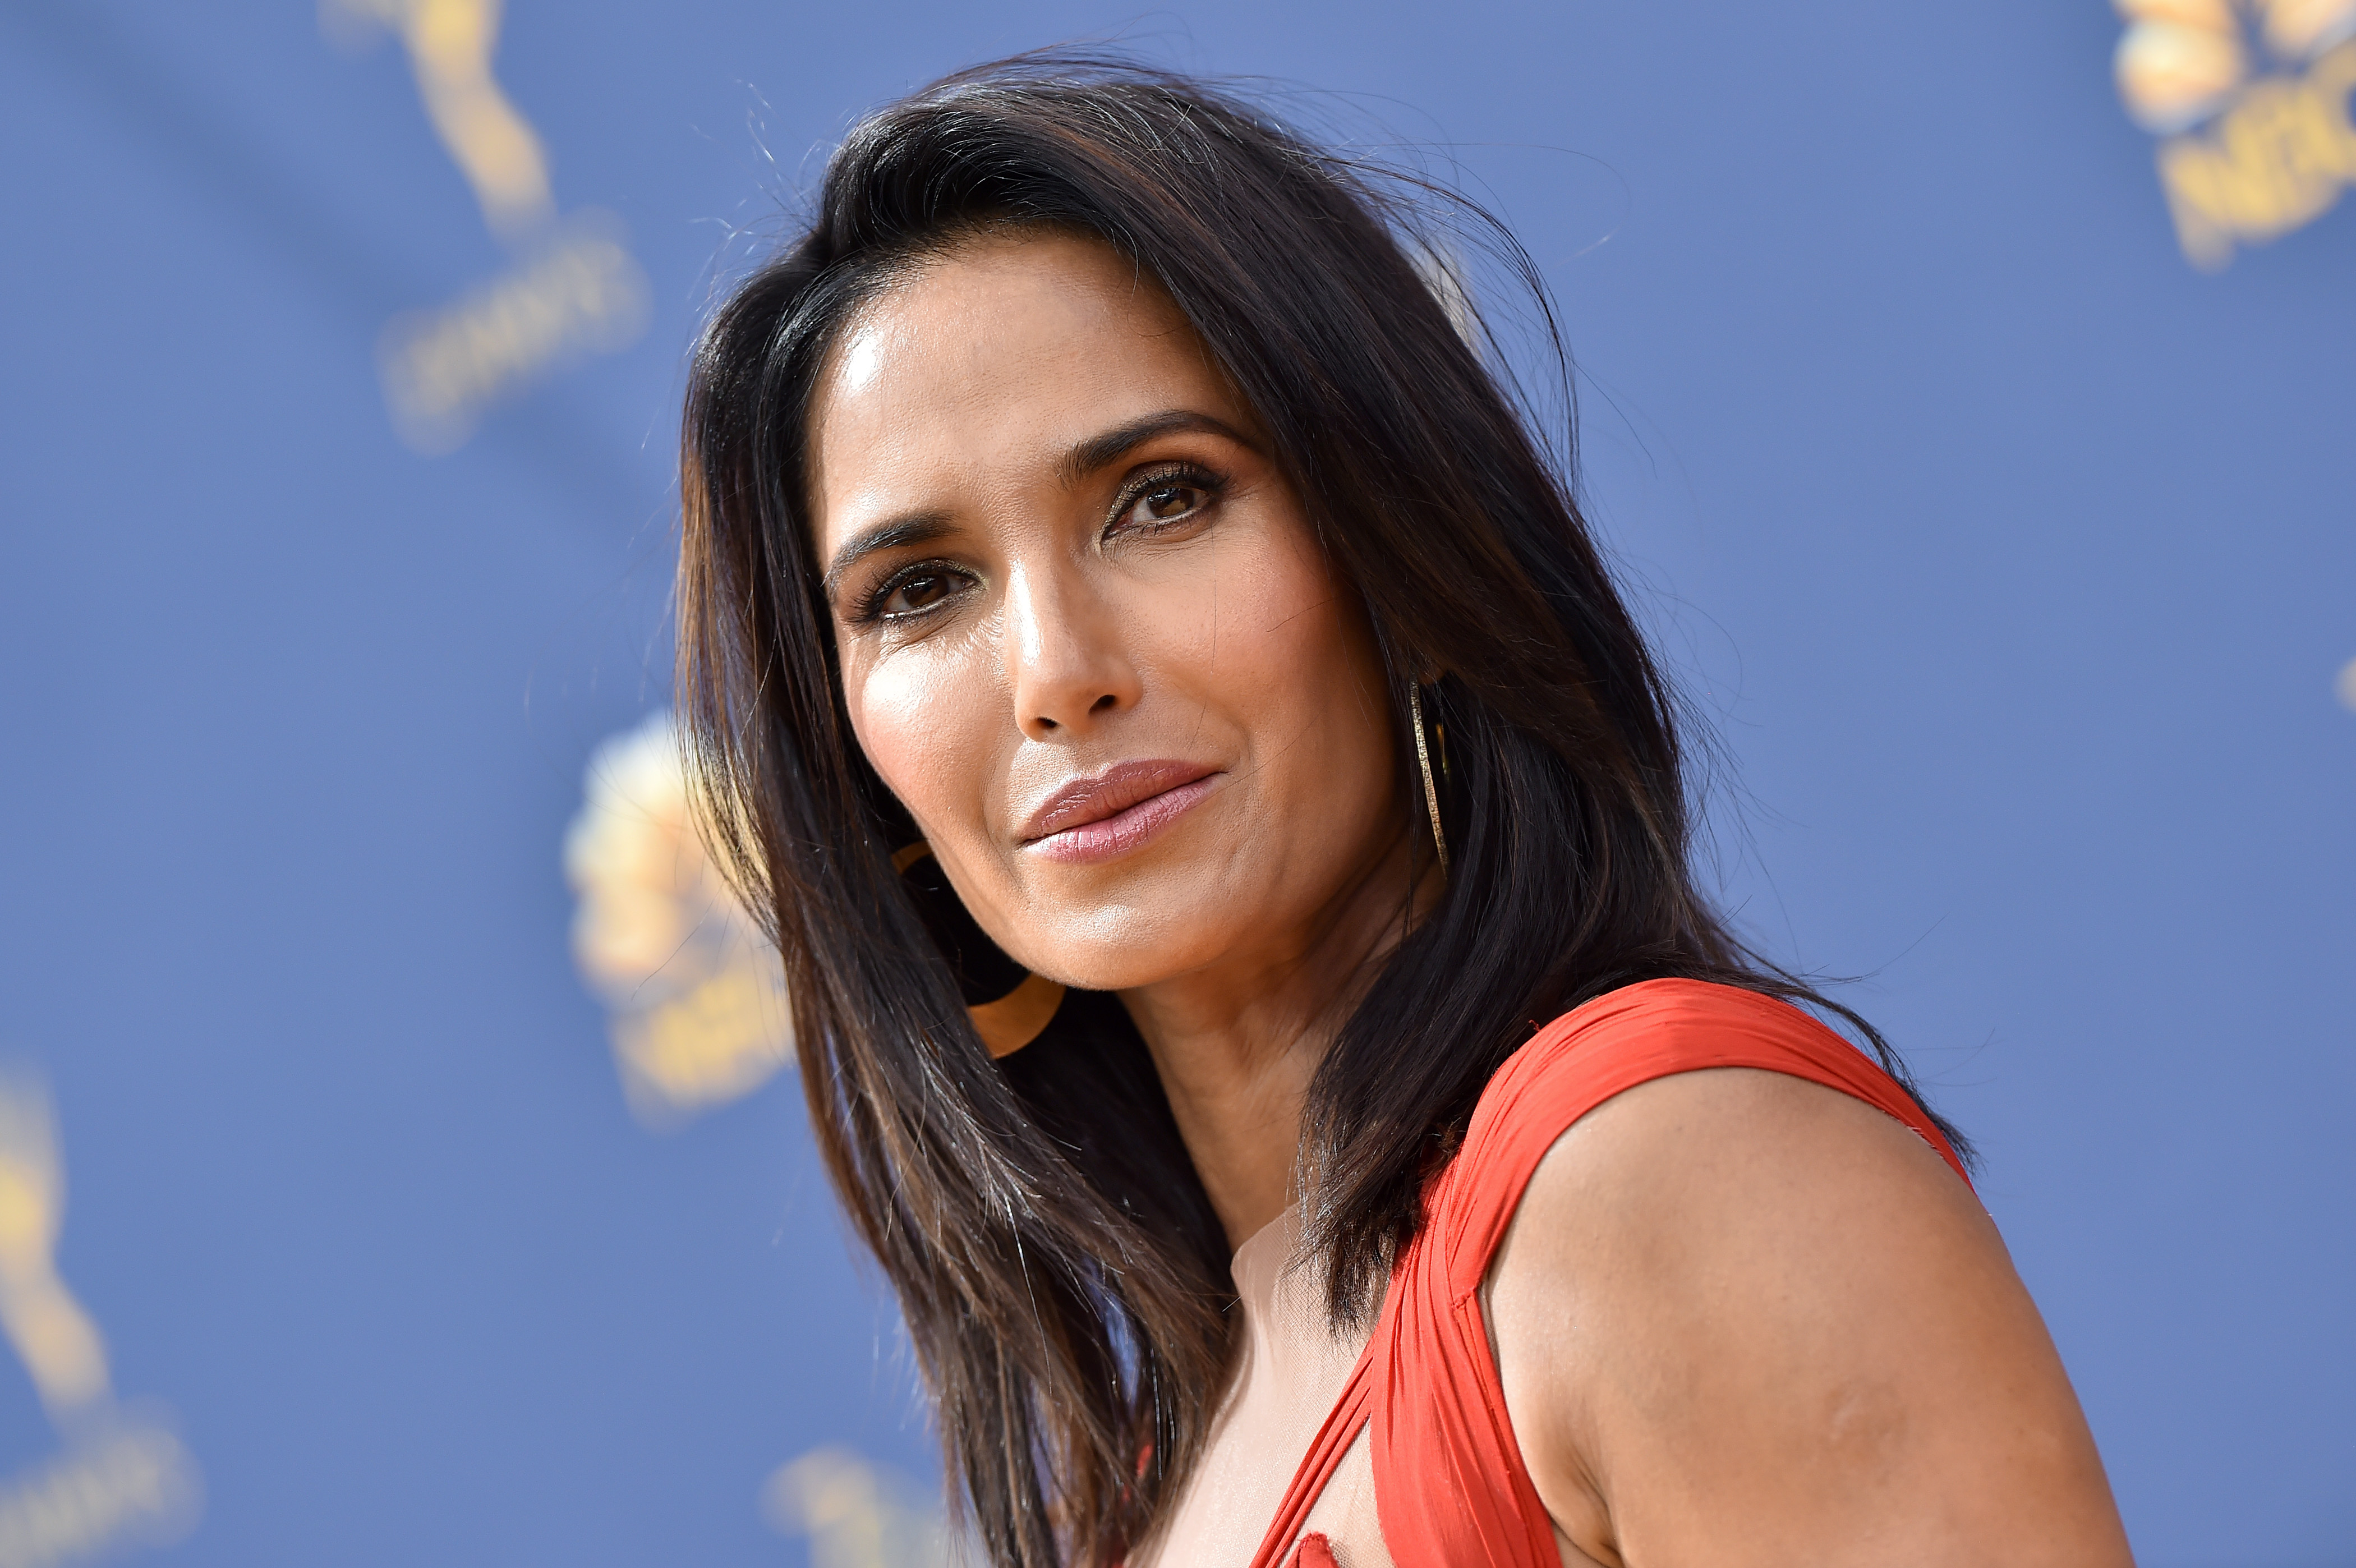 Padma Lakshmi attends the 70th Emmy Awards  in Los Angeles on Sept. 17, 2018. (Axelle/Bauer-Griffin—FilmMagic/Getty Images)